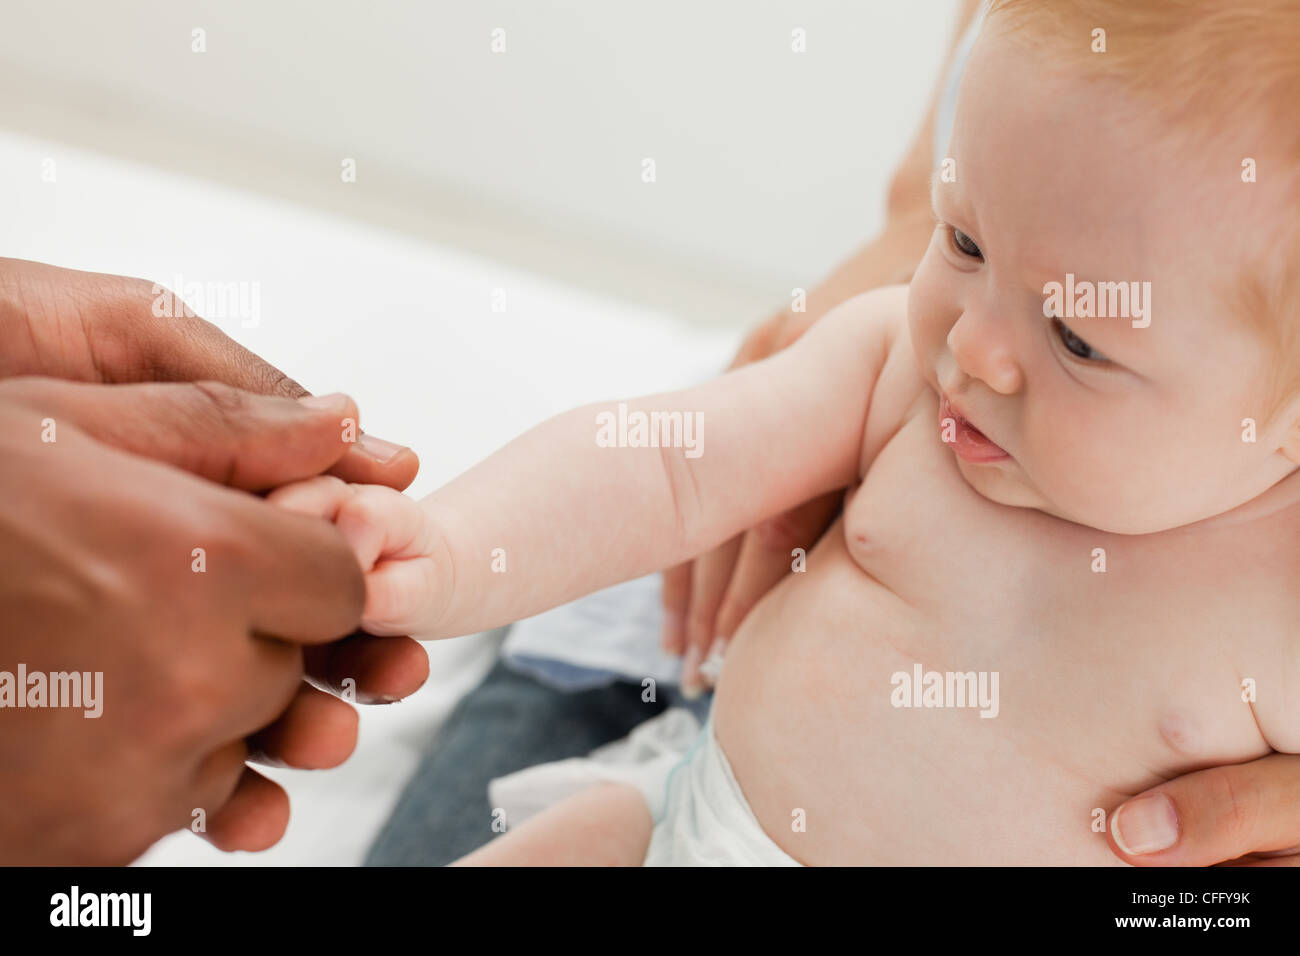 Close up of male hands holding baby's hand Stock Photo